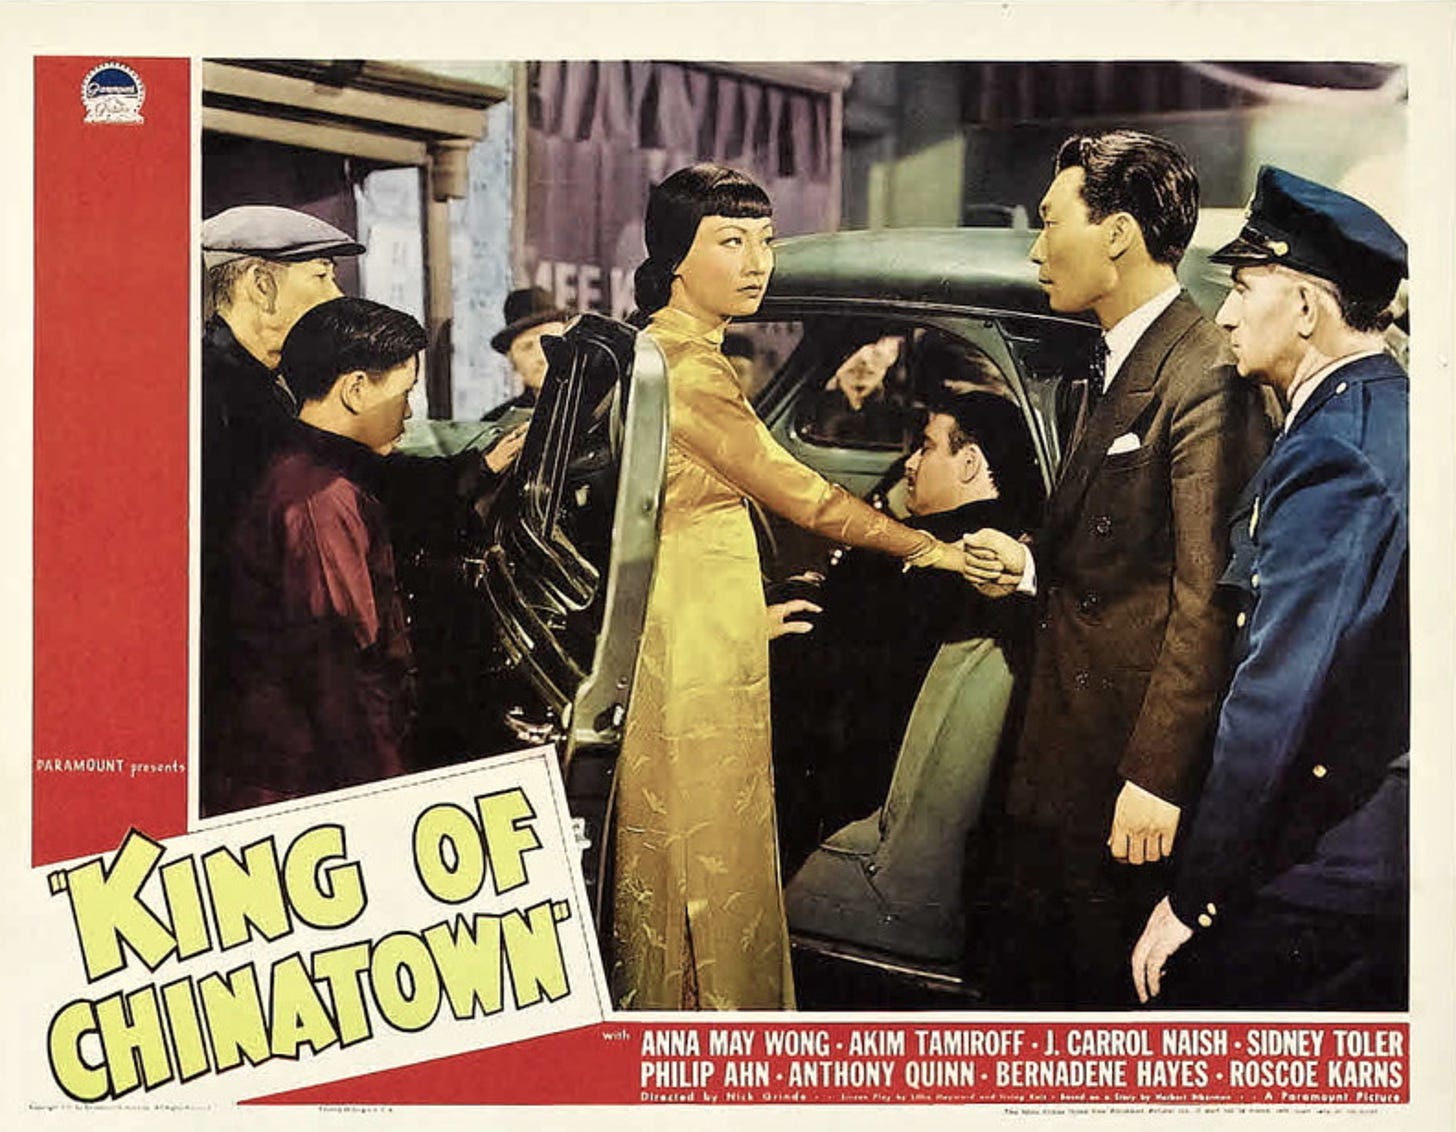 poster for King of Chinatown (1939) showing AMW and Philip Ahn standing next to the gangster who has been shot in his car